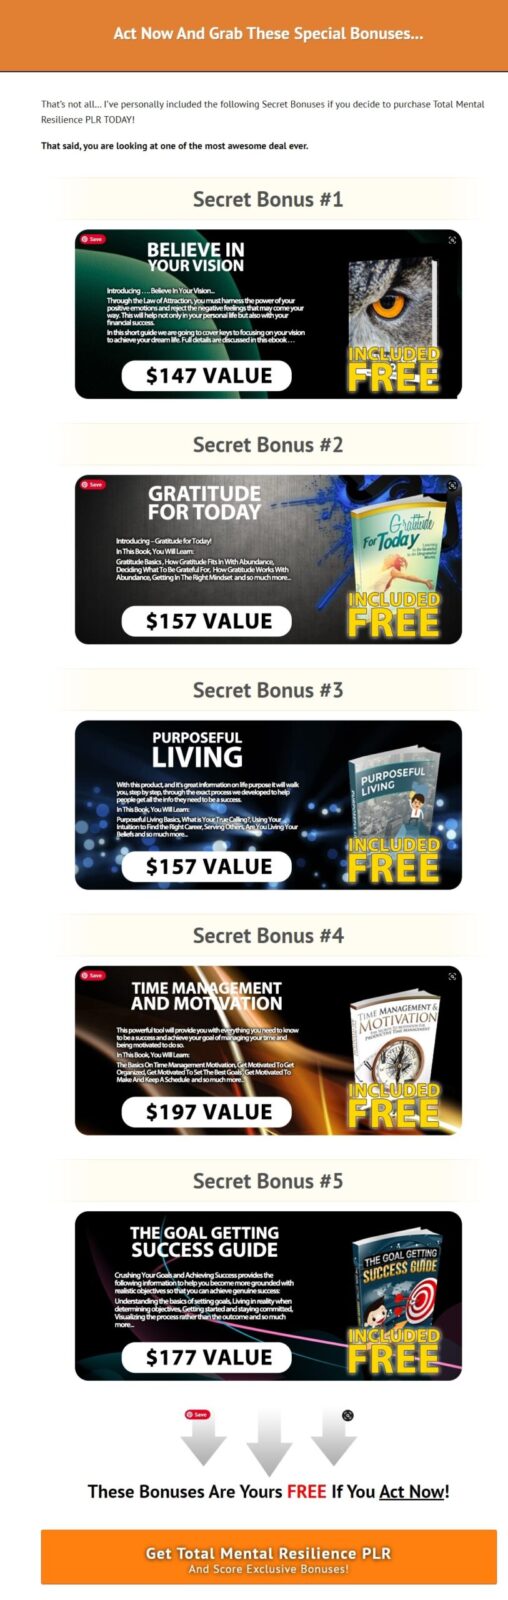 After making your purchase of TOTAL MENTAL RESILIENCE, the bonuses will be instantly available in your Customer Portal. It is that simple! Just be doubly sure that you purchase through my recommendation link to qualify for this bonus bundle.